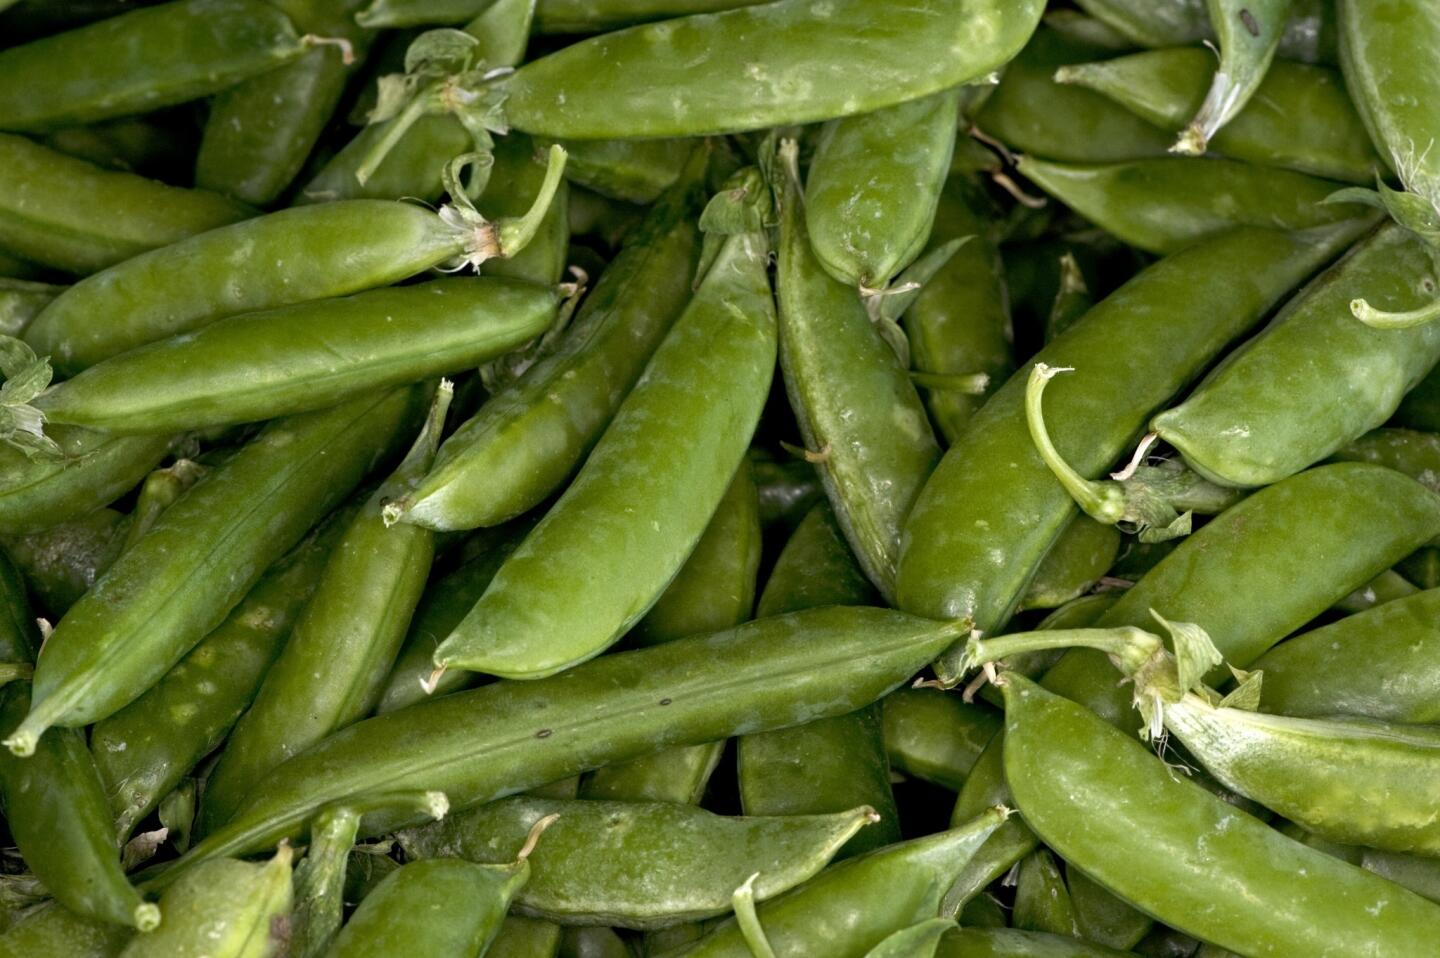 Imported snap peas